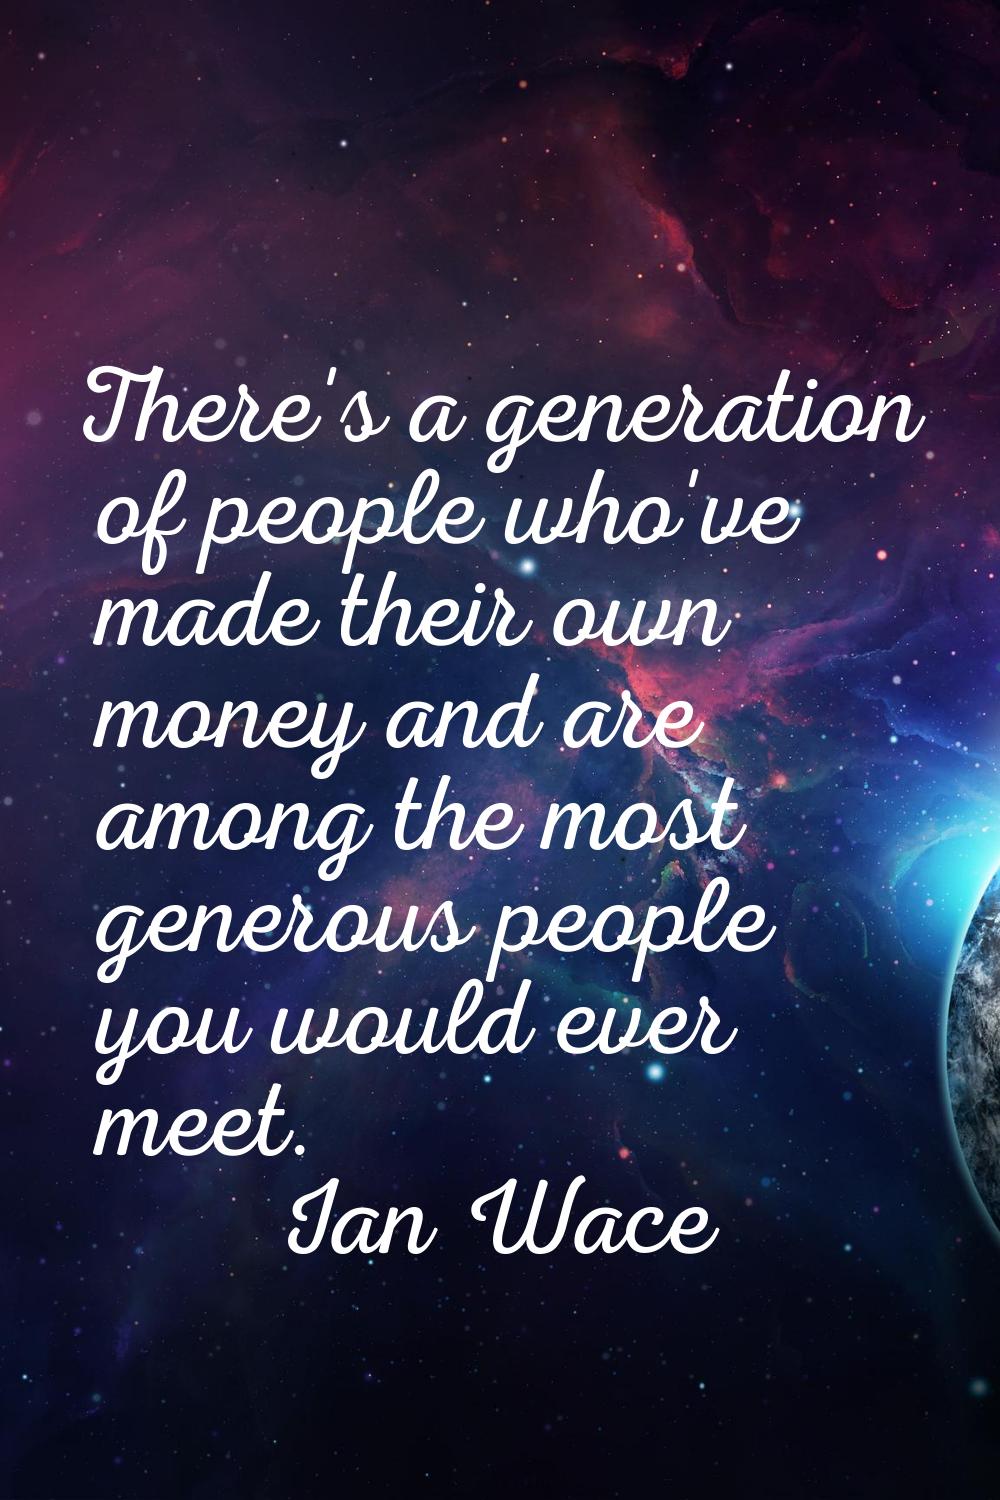 There's a generation of people who've made their own money and are among the most generous people y